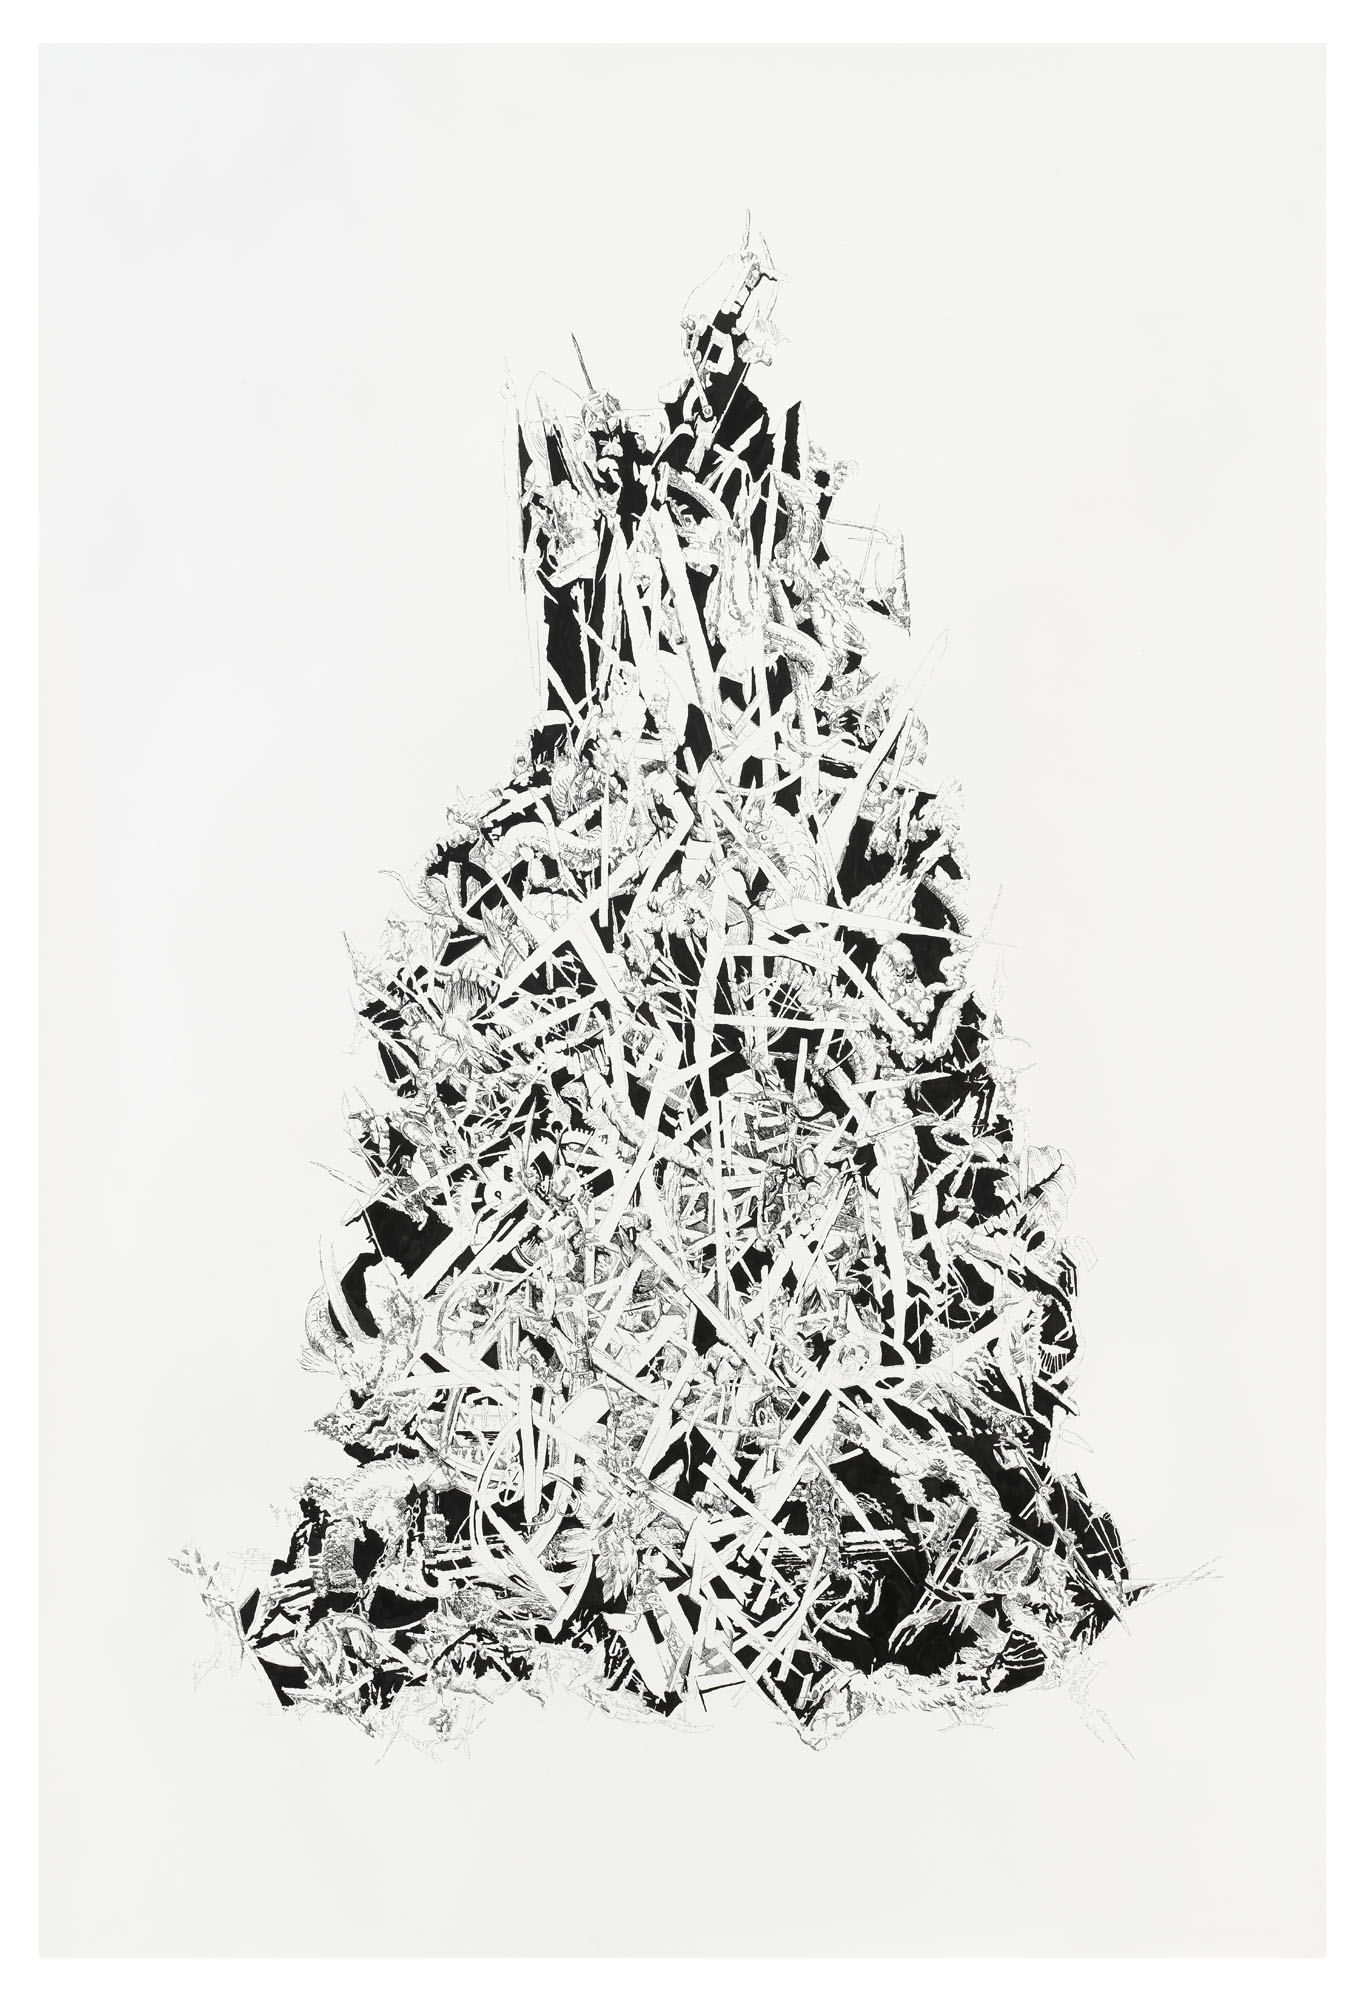 BK P69 | untitled | ink on paper | 250x170cm | 2010 | privat collection munich